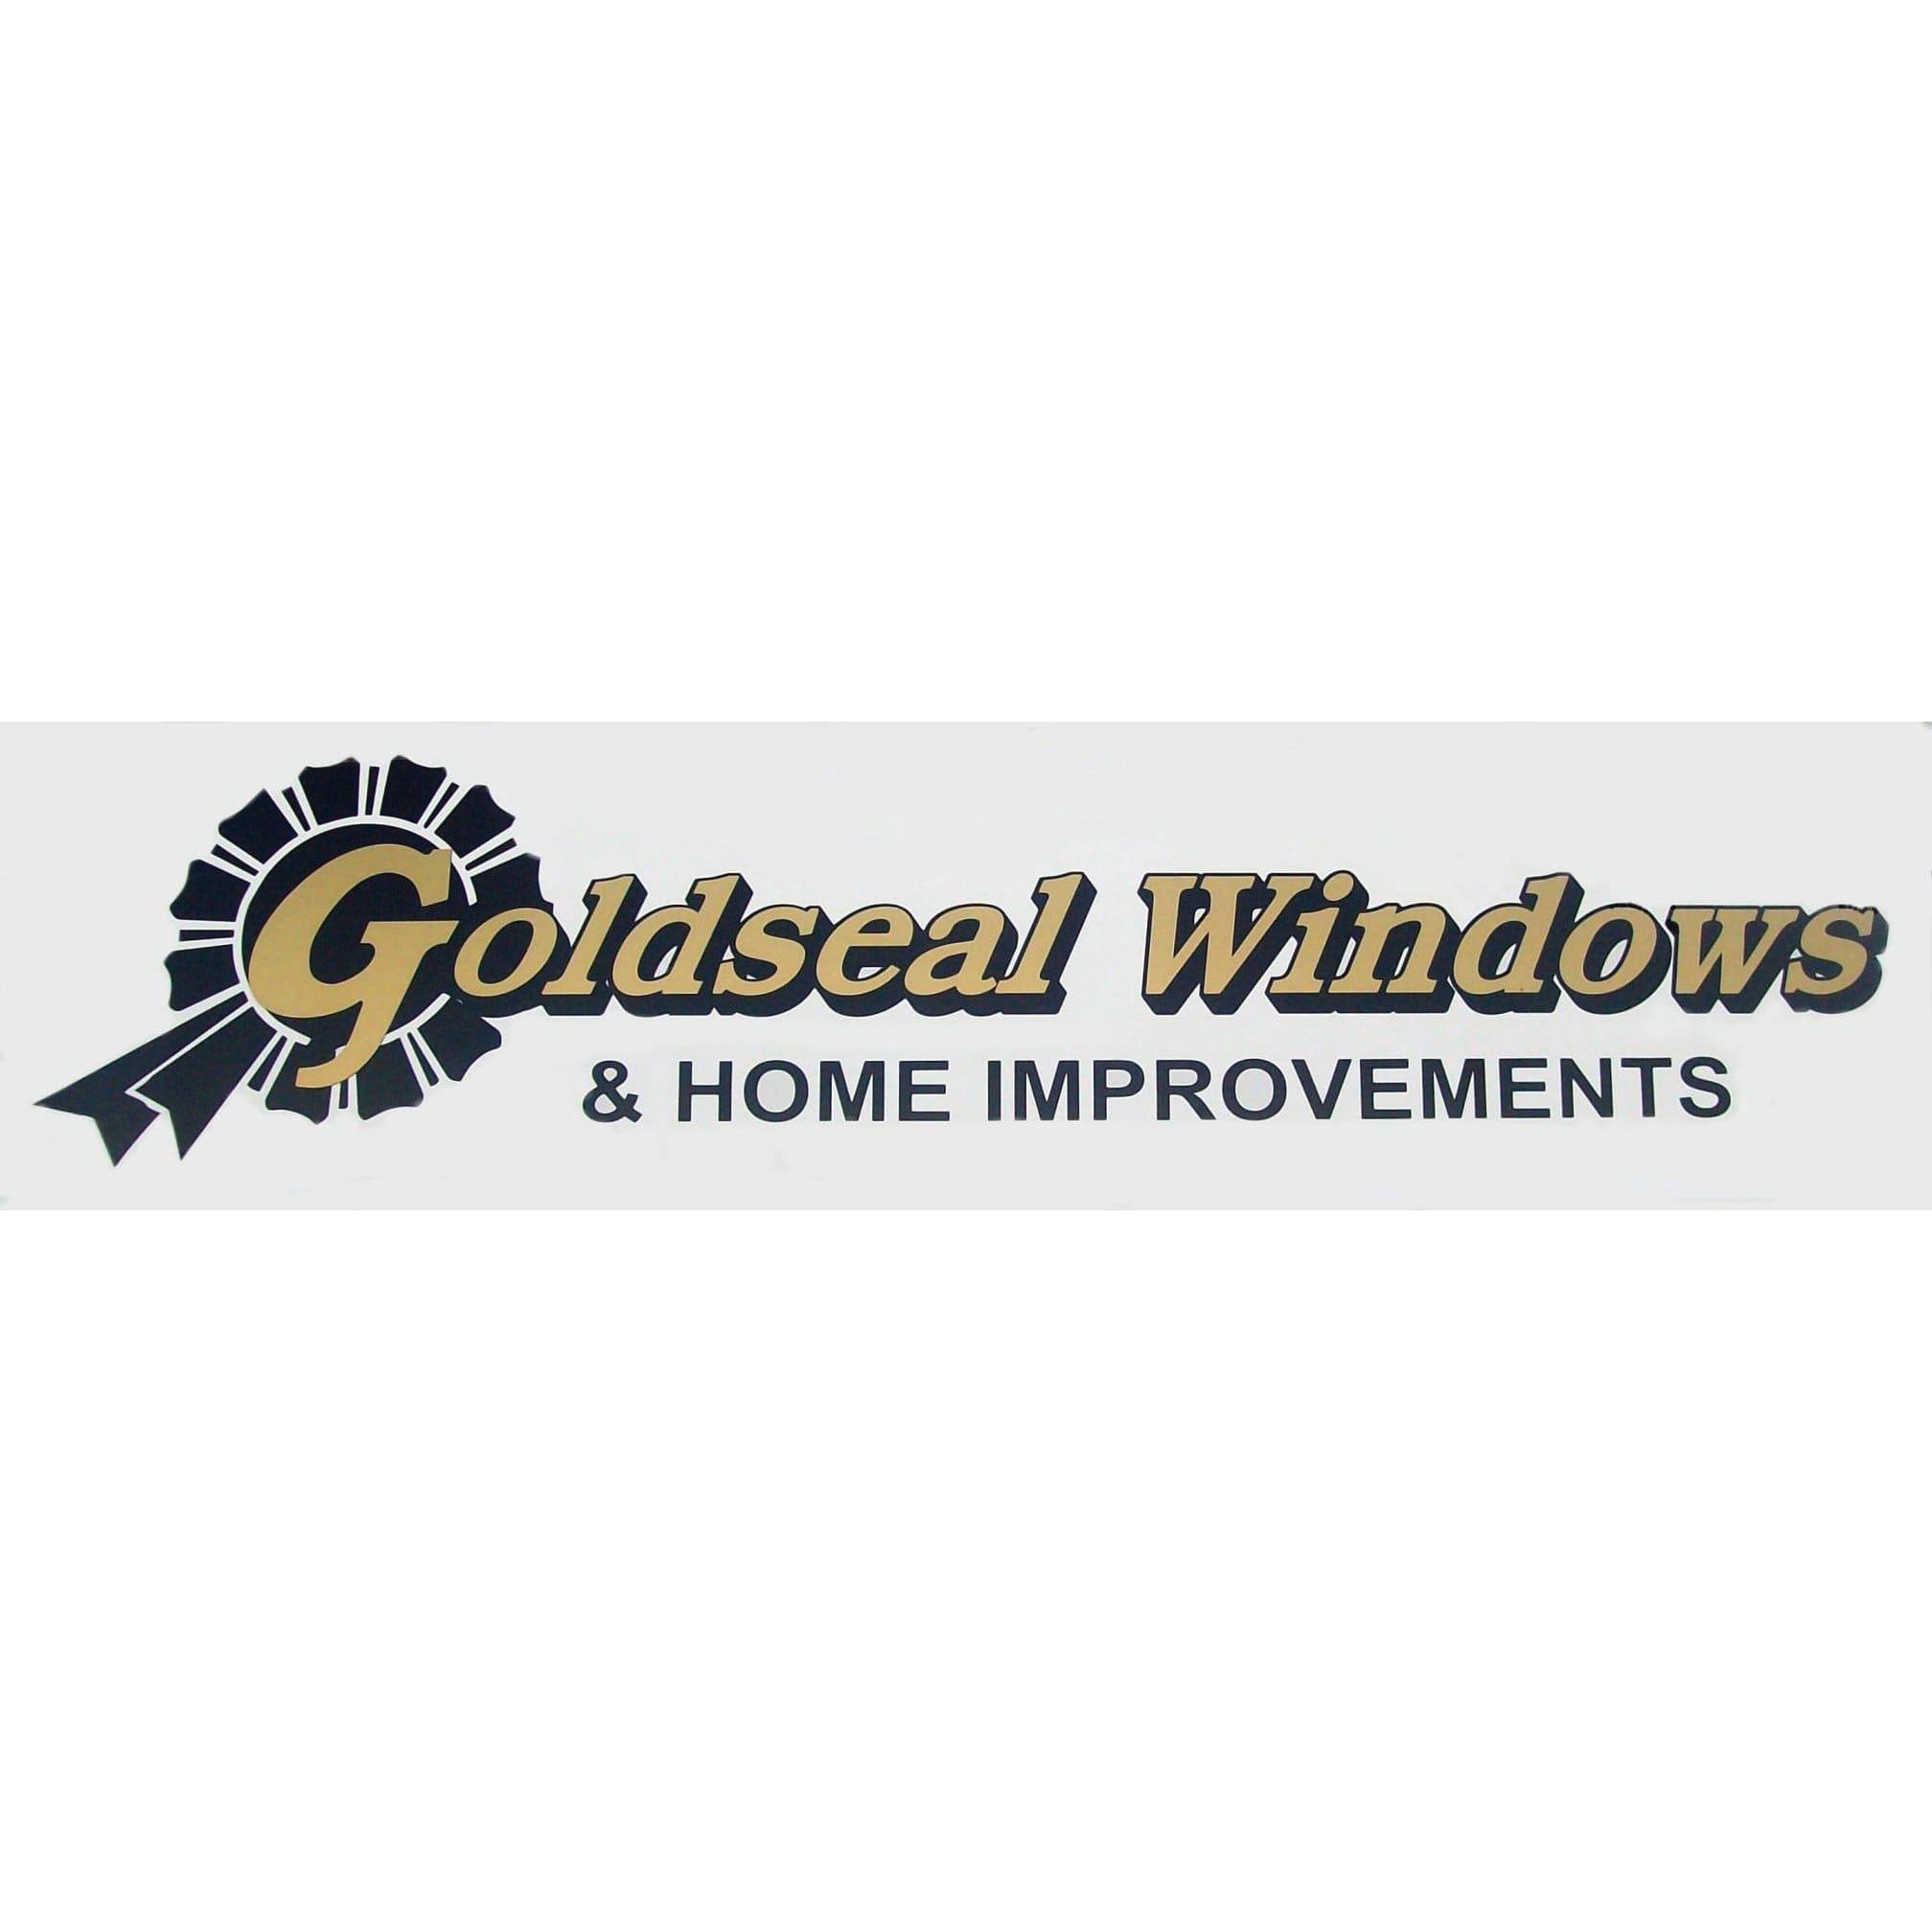 Goldseal Windows & Home Improvements - Sheffield, South Yorkshire S9 3QN - 01142 426032 | ShowMeLocal.com